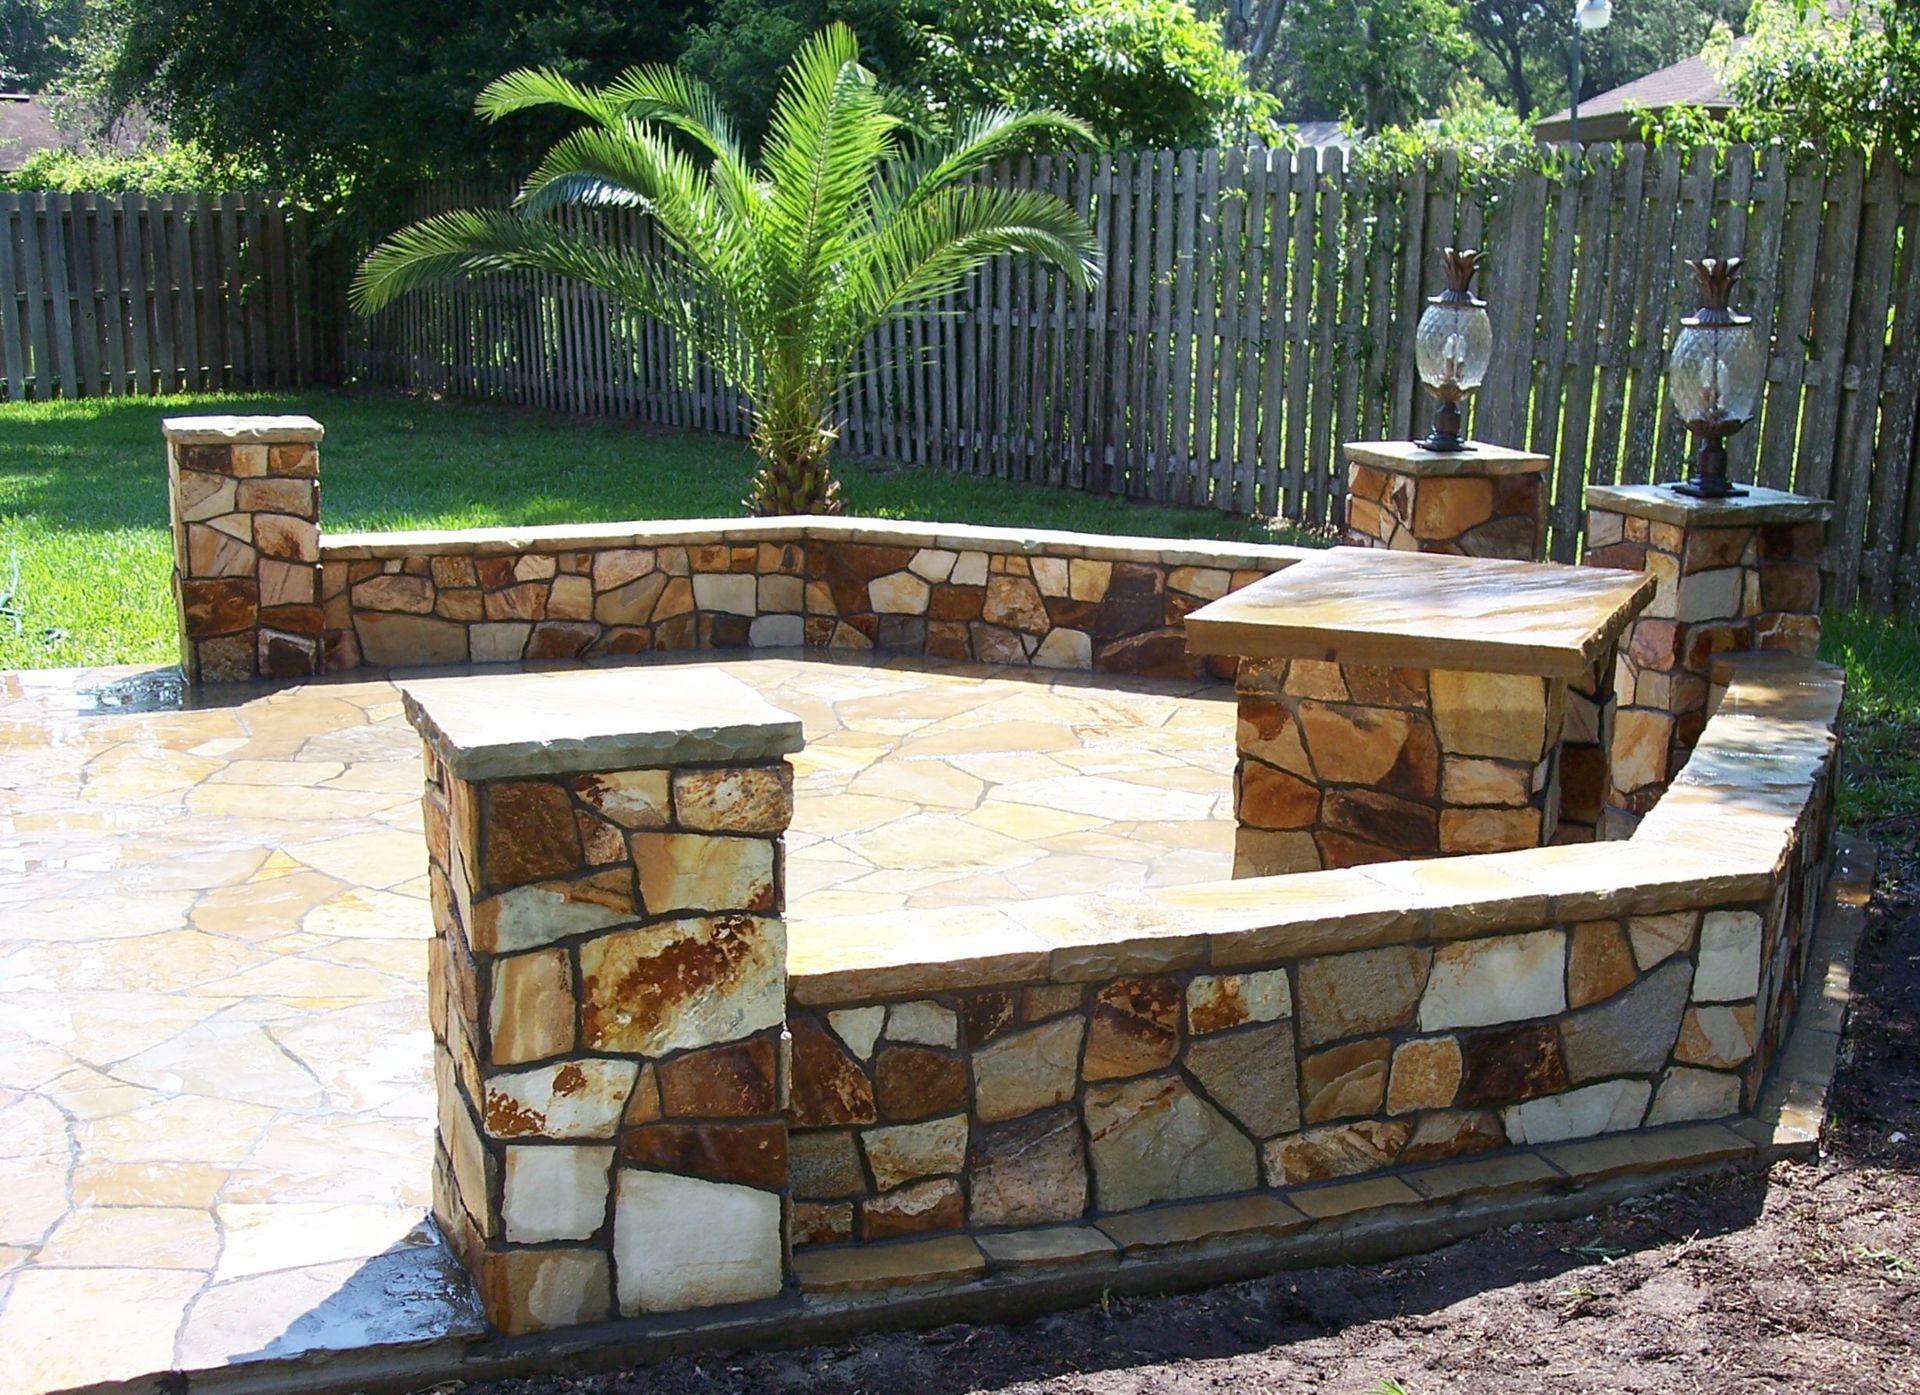 hardscape, paver, pavers, patio, paver patio, paver patios, driveway, paver driveway, paver driveways, walkway, paver walkway, paver landscaping, stone steps, paver steps, pool deck, paver pool deck, paver pool decking, pool coping, natural stone, stone, stacked stone, veneer, stone veneer, flagstone, bluestone, thermal bluestone, spa design, pool deck design, outdoor kitchen, summer kitchen, fire pit, firepit, sitting wall, pergola, hand-made pergola, seating area, outdoor living, outdoor entertaining, paver contractor, paver design, paver install, paver installation, paver expert, paver experts, warranty, labor warranty, expert installation, expert install, licensed and insured, licensed, insured, licensed insured, award winning designs, Angie's List Super Service Award, Angie's List Award, customer reviews, excellent reputation, reputation, fireplace, fireplace renovation, stone fireplace, fireplace veneer, fireplace reconstruction, before and after pictures, years experience, experienced, Jacksonville, Ponte Vedra, Nocatee, Fleming Island, Queens Harbor, St. Johns, Fruit Cove, St. Augustine, Jacksonville pavers, paver driveway Jacksonville, Jacksonville paver driveway, Jacksonville driveway, paver patio Jacksonville, patio Jacksonville, Jacksonville paver patio, Jacksonville patio, Ponte Vedra pavers, paver driveway Ponte Vedra, driveway Ponte Vedra, Ponte Vedra paver driveway, Ponte Vedra driveway, paver patio Ponte Vedra, patio Ponte Vedra, Ponte Vedra paver patio, Ponte Vedra patio, Nocatee pavers, driveway Nocatee, paver driveway Nocatee, Nocatee driveway, Nocatee paver driveway, paver patio Nocatee, patio Nocatee, Nocatee paver patio, Nocatee patio, Sawgrass pavers, Sawgrass paver driveway, Sawgrass driveway, driveway Sawgrass, paver driveway Sawgrass, paver patio Sawgrass, patio Sawgrass, Sawgrass patio, Sawgrass paver patio, Fleming Island pavers, Fleming Island paver driveway, paver driveway Fleming Island, Fleming Island driveway, driveway Fleming Island, paver patio Fleming Island, Fleming Island paver patio, patio Fleming Island, Fleming Island patio, Queens Harbor pavers, paver driveway Queens Harbor, Queens Harbor paver driveway, Queens Harbor driveway, driveway Queens Harbor, paver patio Queens Harbor, Queens Harbor paver patio, patio Queens Harbor, Queens Harbor patio, St. Johns pavers, St. Johns paver driveway, paver driveway St. Johns, St. Johns driveway, driveway St. Johns, St. Johns paver patio, paver patio St. Johns, patio St. Johns, St. Johns patio, Fruit Cove pavers, paver driveway Fruit Cove, Fruit Cove paver driveway, driveway Fruit Cove, Fruit Cove driveway, Fruit Cove paver patio, paver patio Fruit Cove, patio Fruit Cove, Fruit Cove patio, St. Augustine pavers, paver driveway St. Augustine, St. Augustine paver driveway, driveway St. Augustine, St. Augustine driveway, St. Augustine patio, patio St Augustine, St. Augustine paver patio, paver patio St. Augustine, Mandarin pavers, Mandarin paver driveway, paver driveway Mandarin, driveway Mandarin, Mandarin driveway, paver patio Mandarin, Mandarin paver patio, patio Mandarin, Mandarin patio, flagstone, baluster